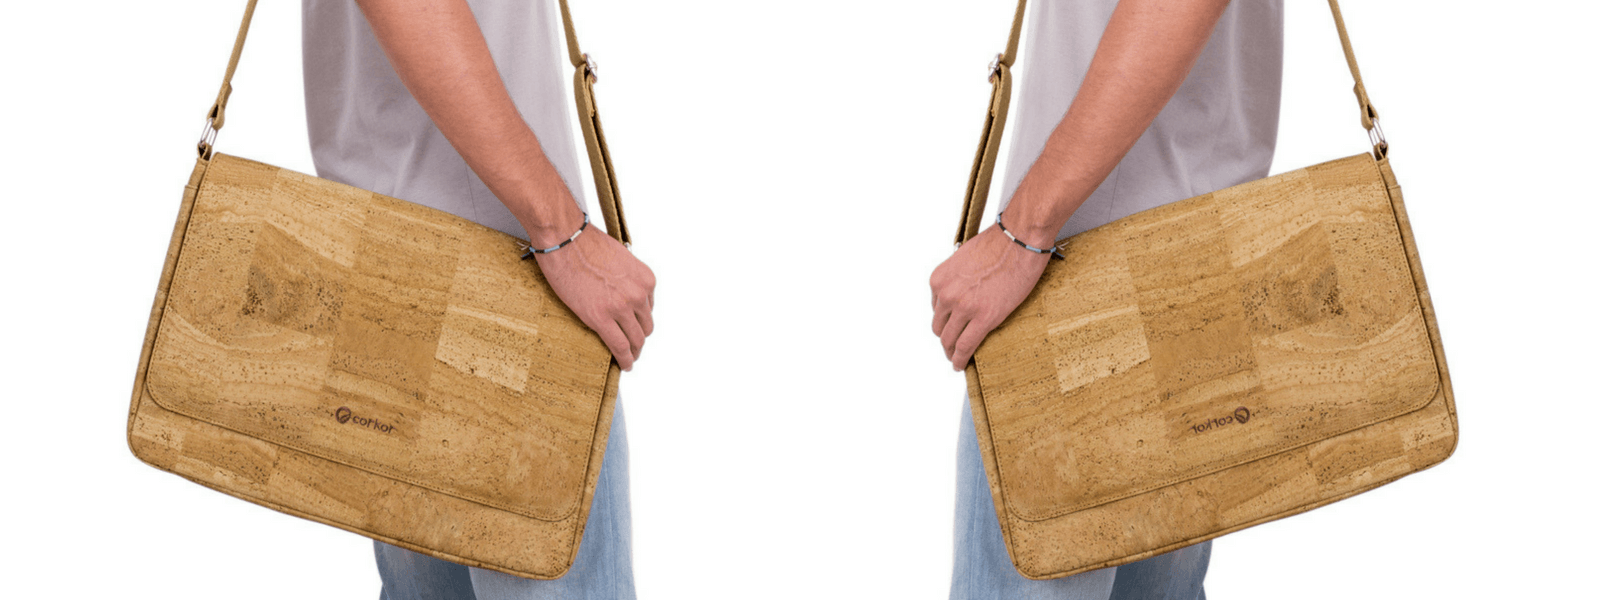 Back-to-Work? Freshen Up Your Office Gear with a Cork Messenger Bag | Corkor